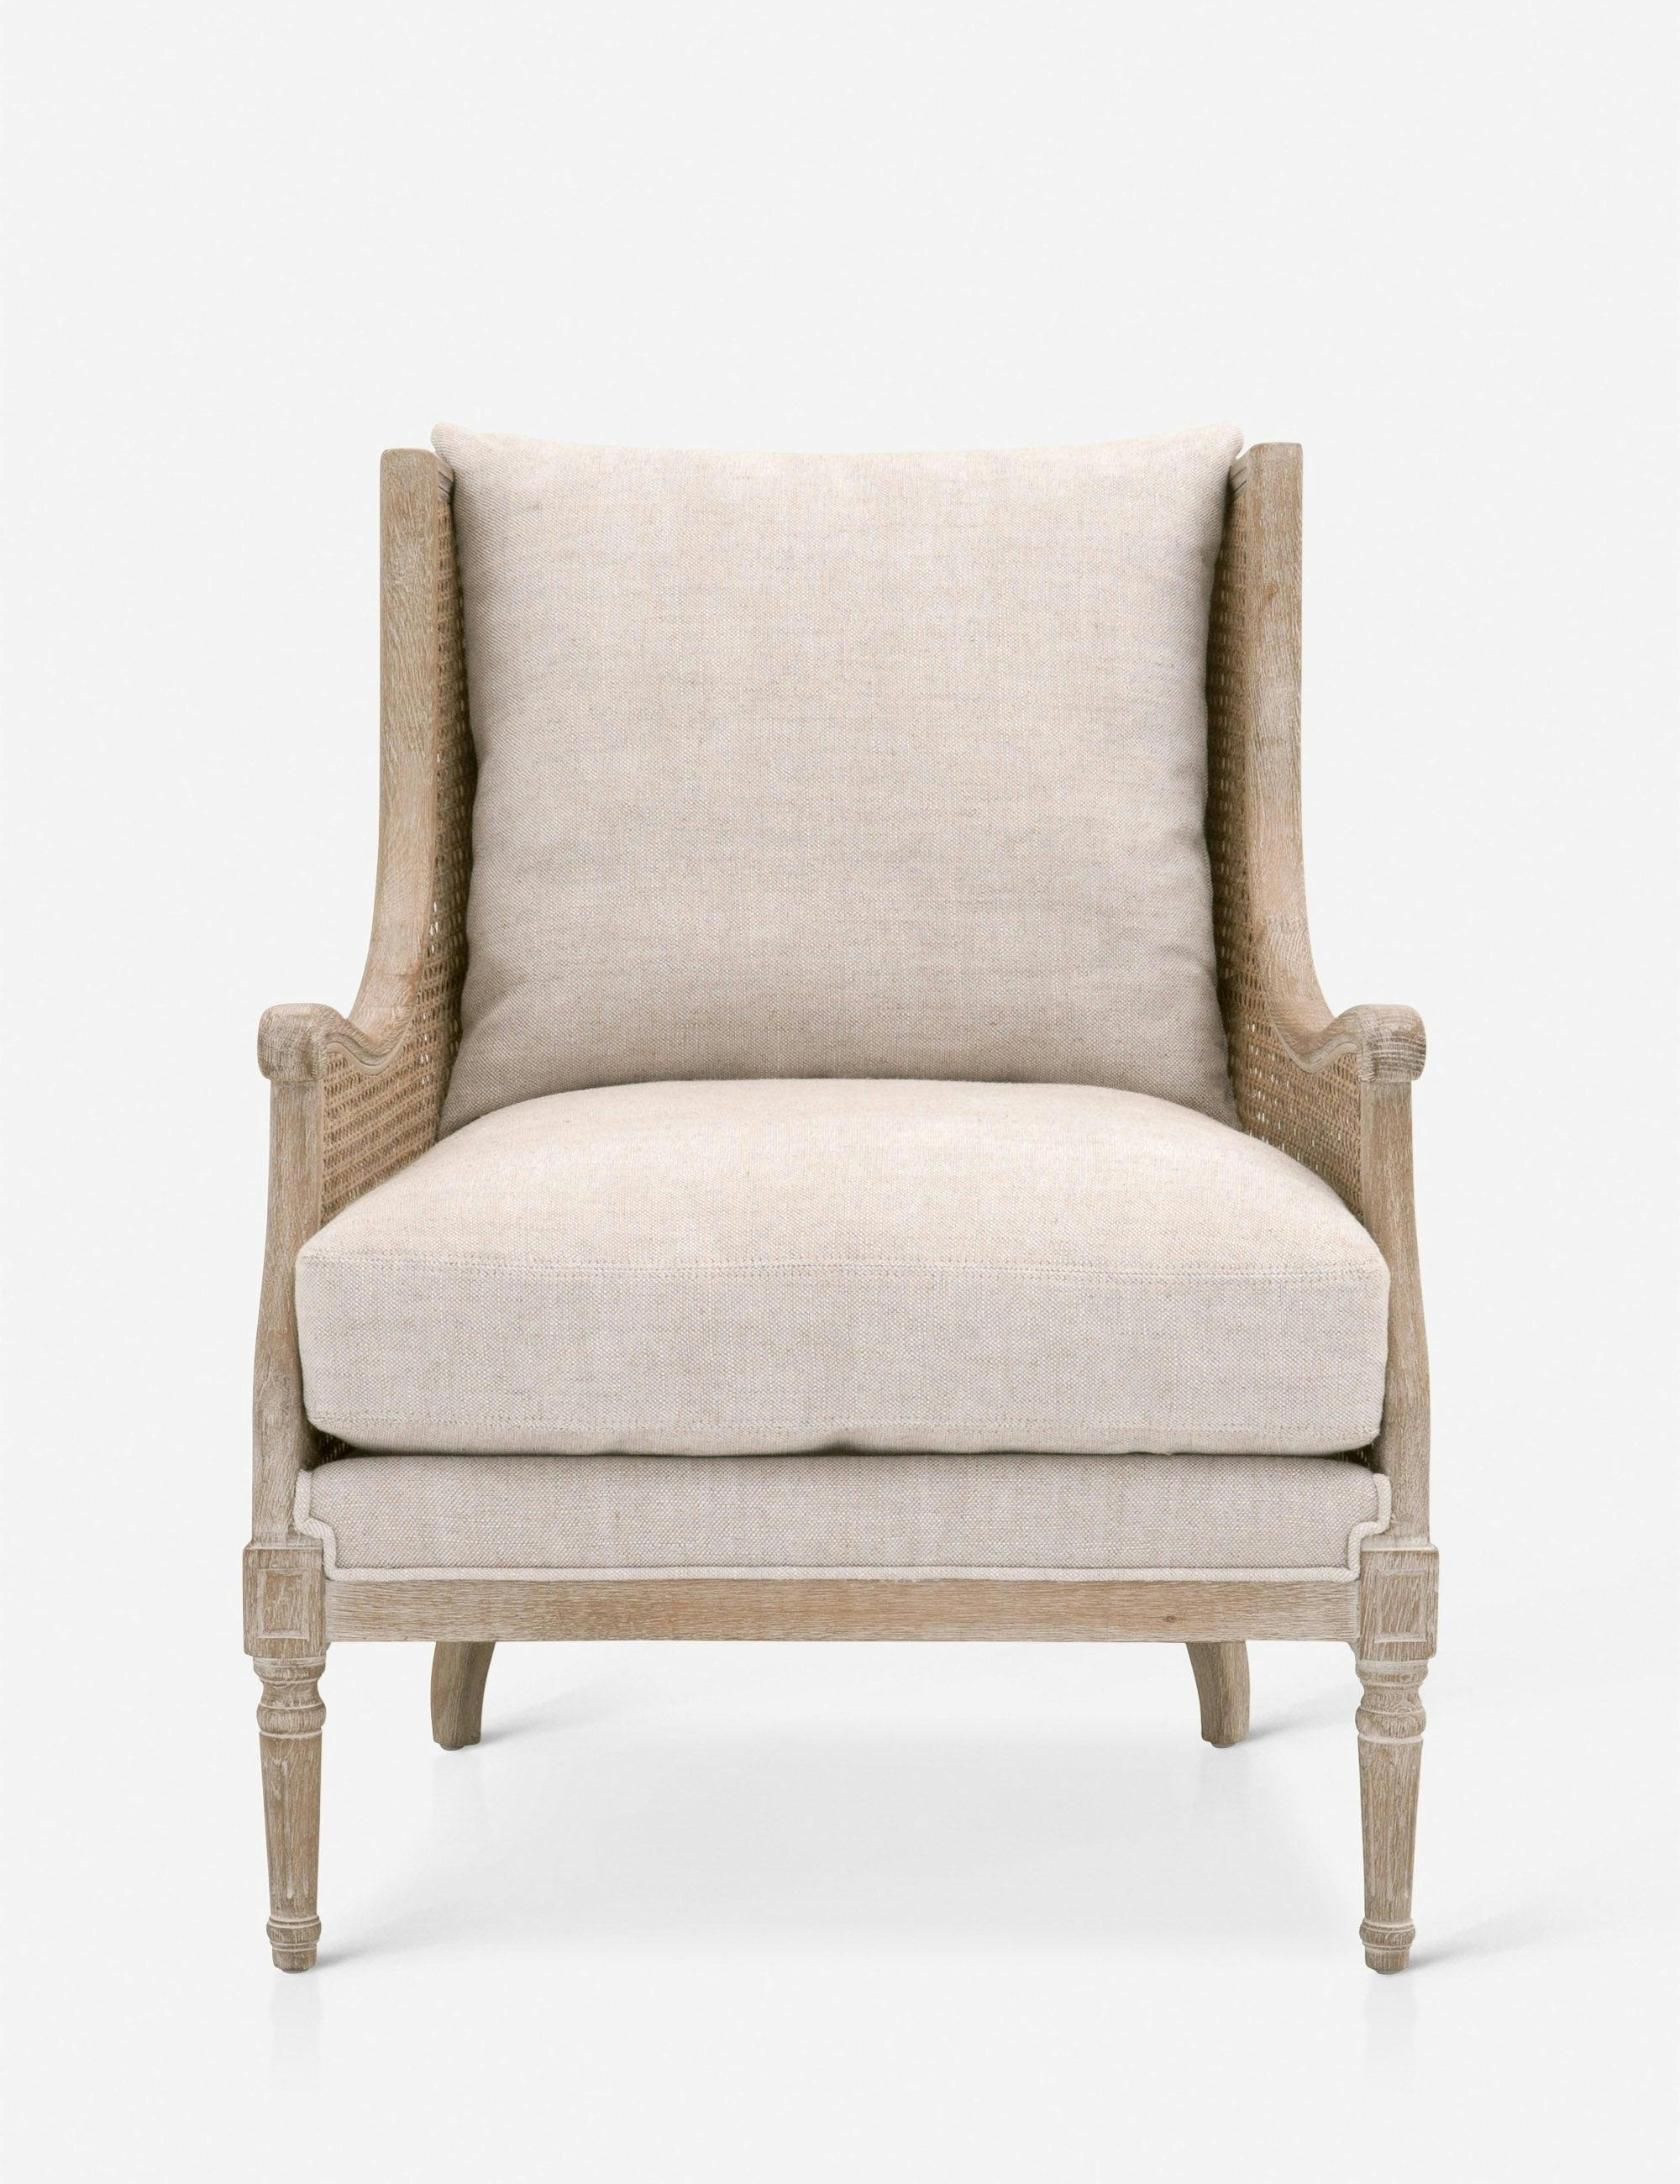 Transitional Gray Velvet & Wood Club Chair with Rattan Accents